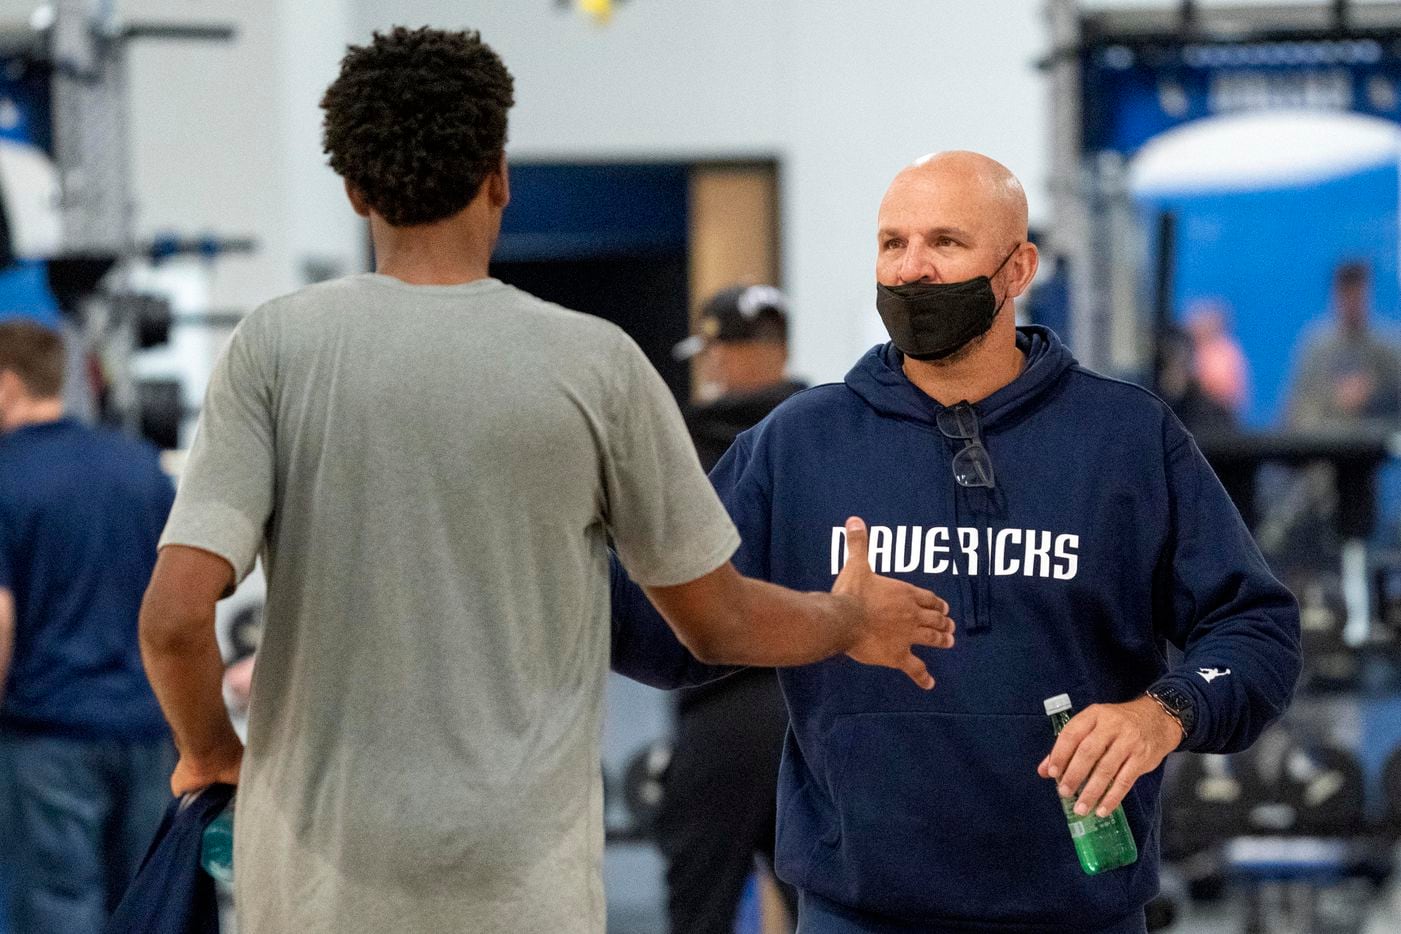 Dallas Mavericks head coach Jason Kidd shakes hands with forward Feron Hunt during a training camp practice Wednesday, September 29, 2021 at the Dallas Mavericks Training Center in Dallas. (Jeffrey McWhorter/Special Contributor)